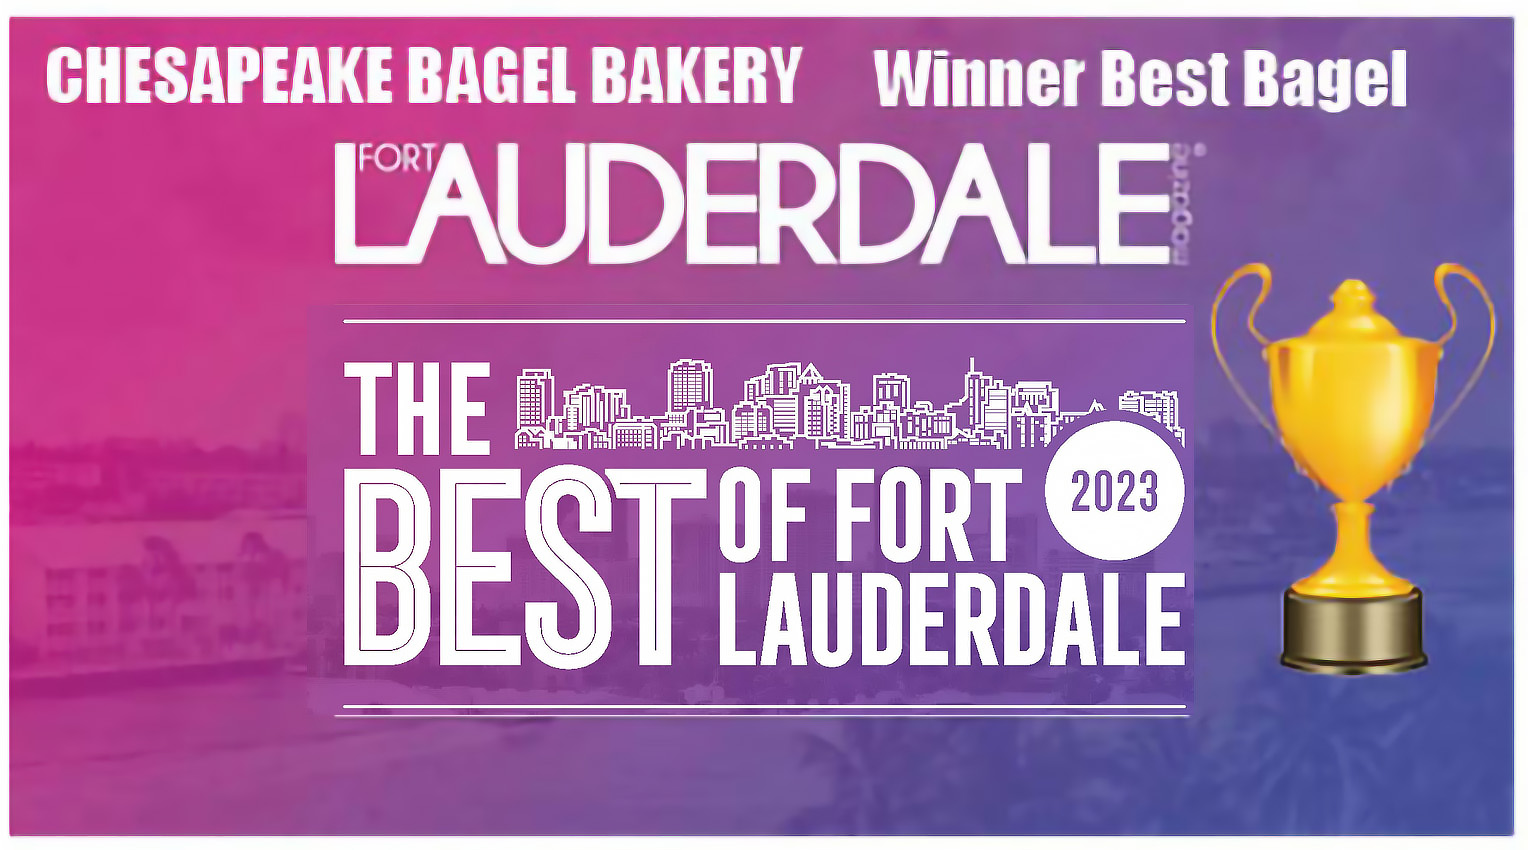 best of ft lauderdale 2023 done